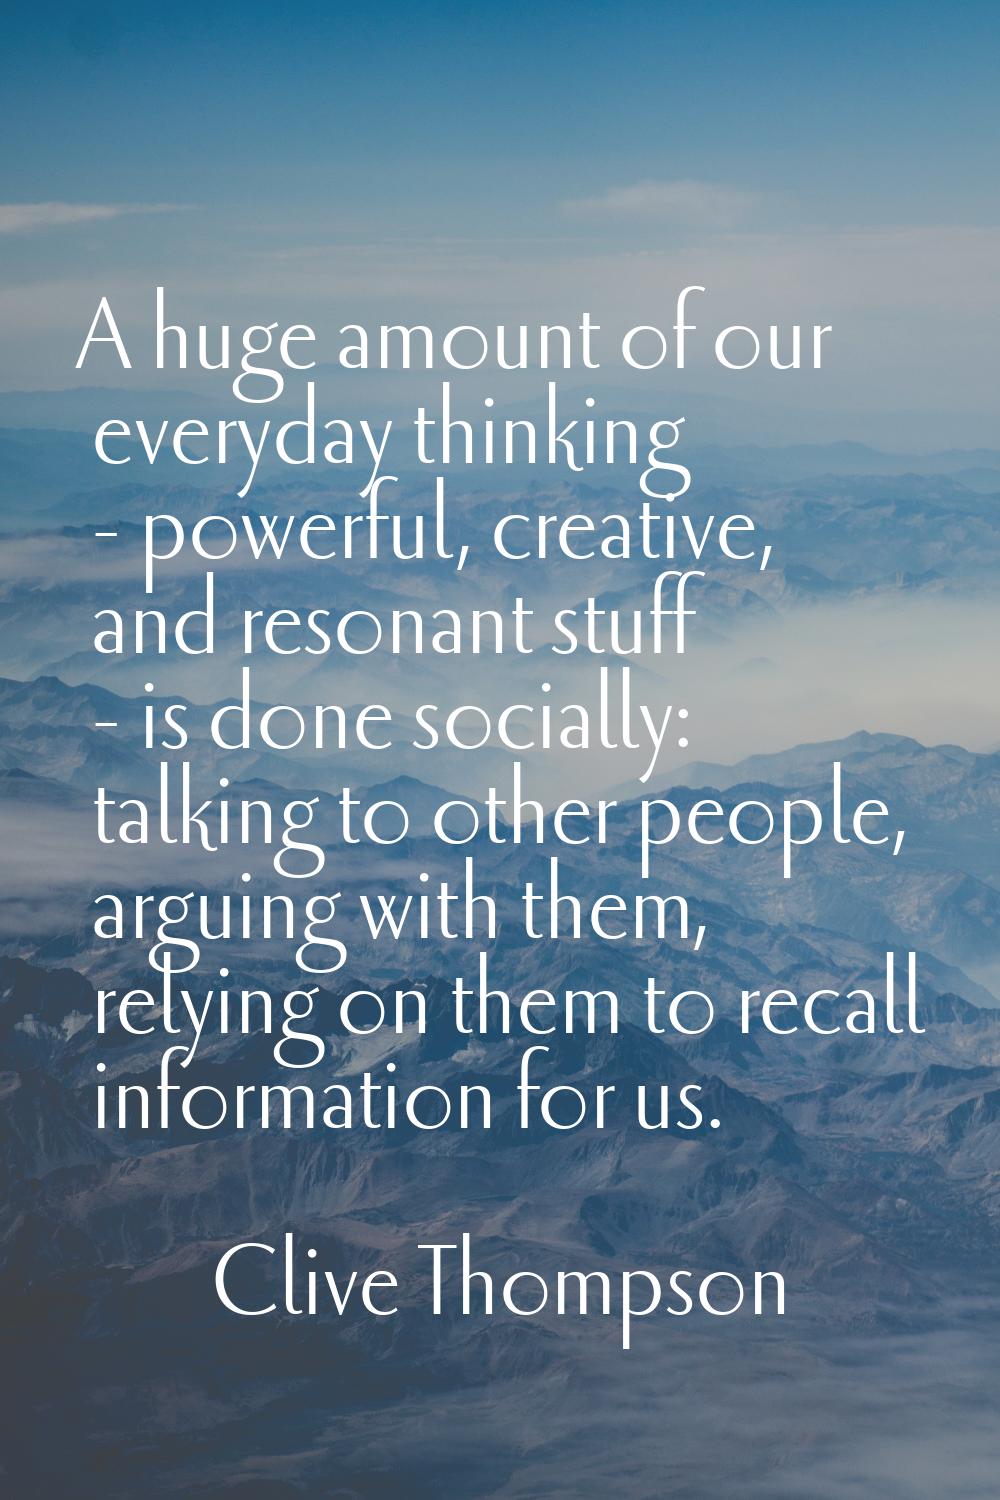 A huge amount of our everyday thinking - powerful, creative, and resonant stuff - is done socially: